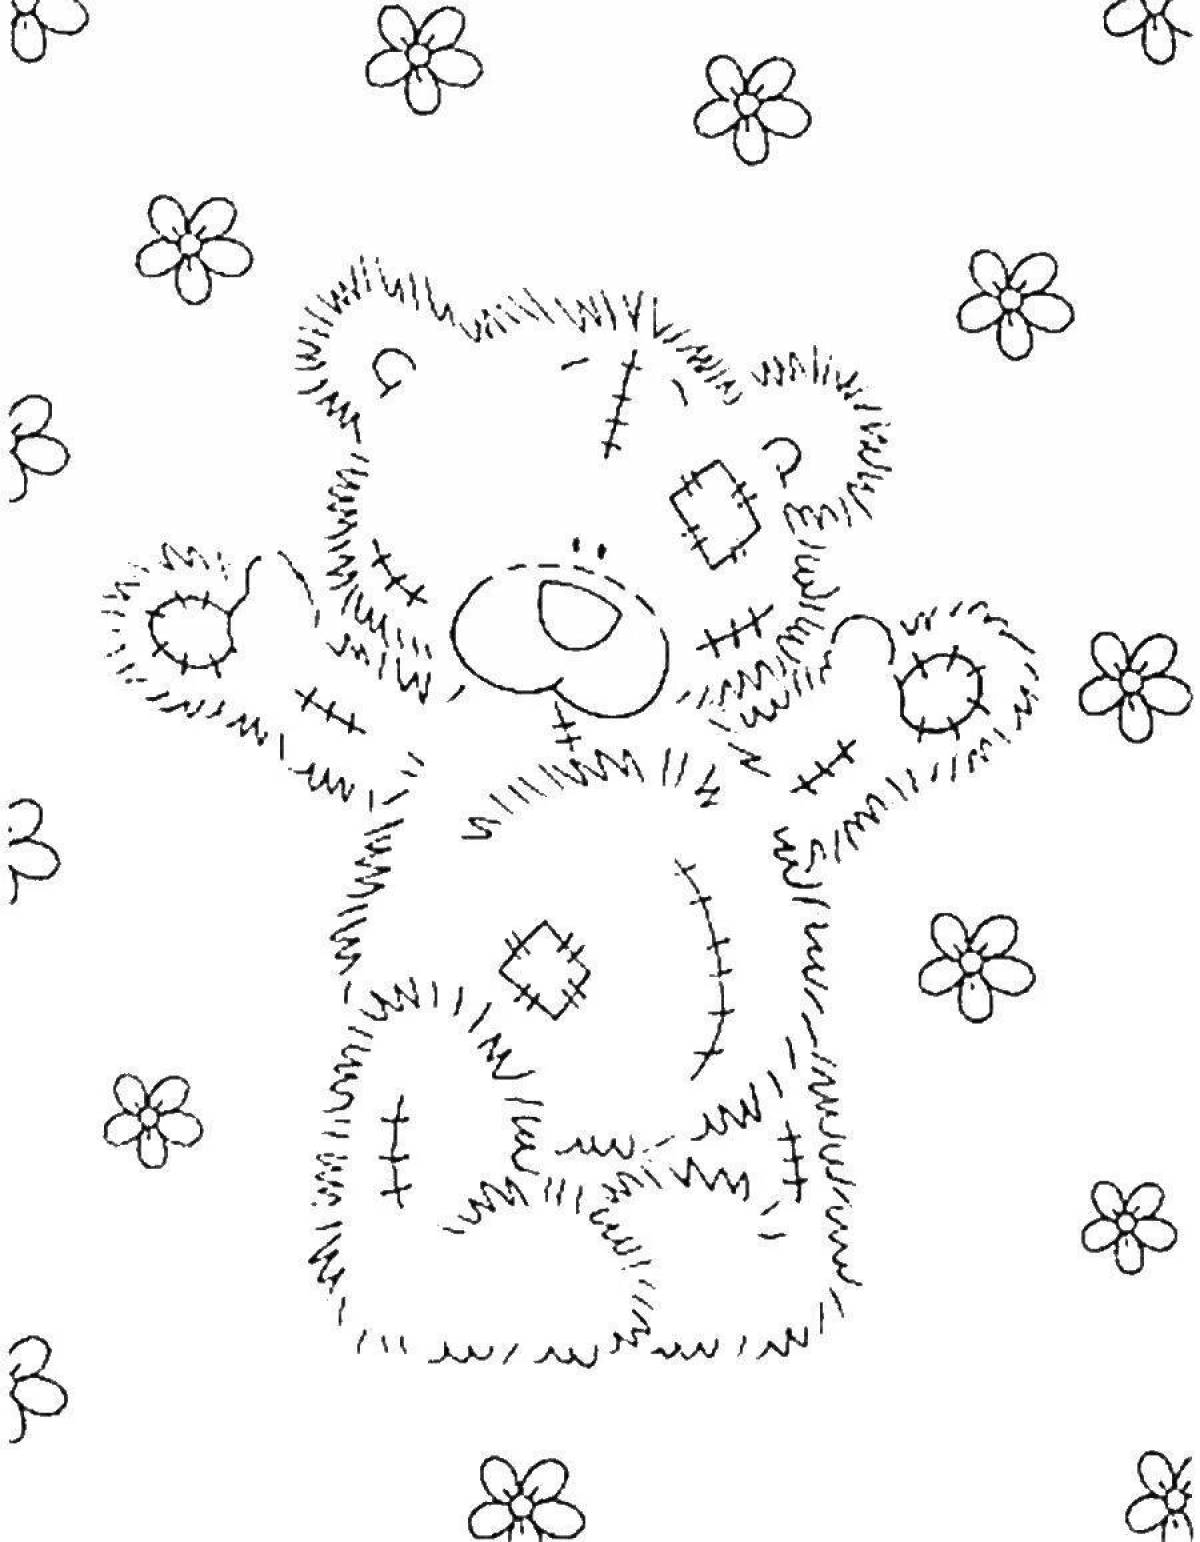 Coloring page winking teddy bear